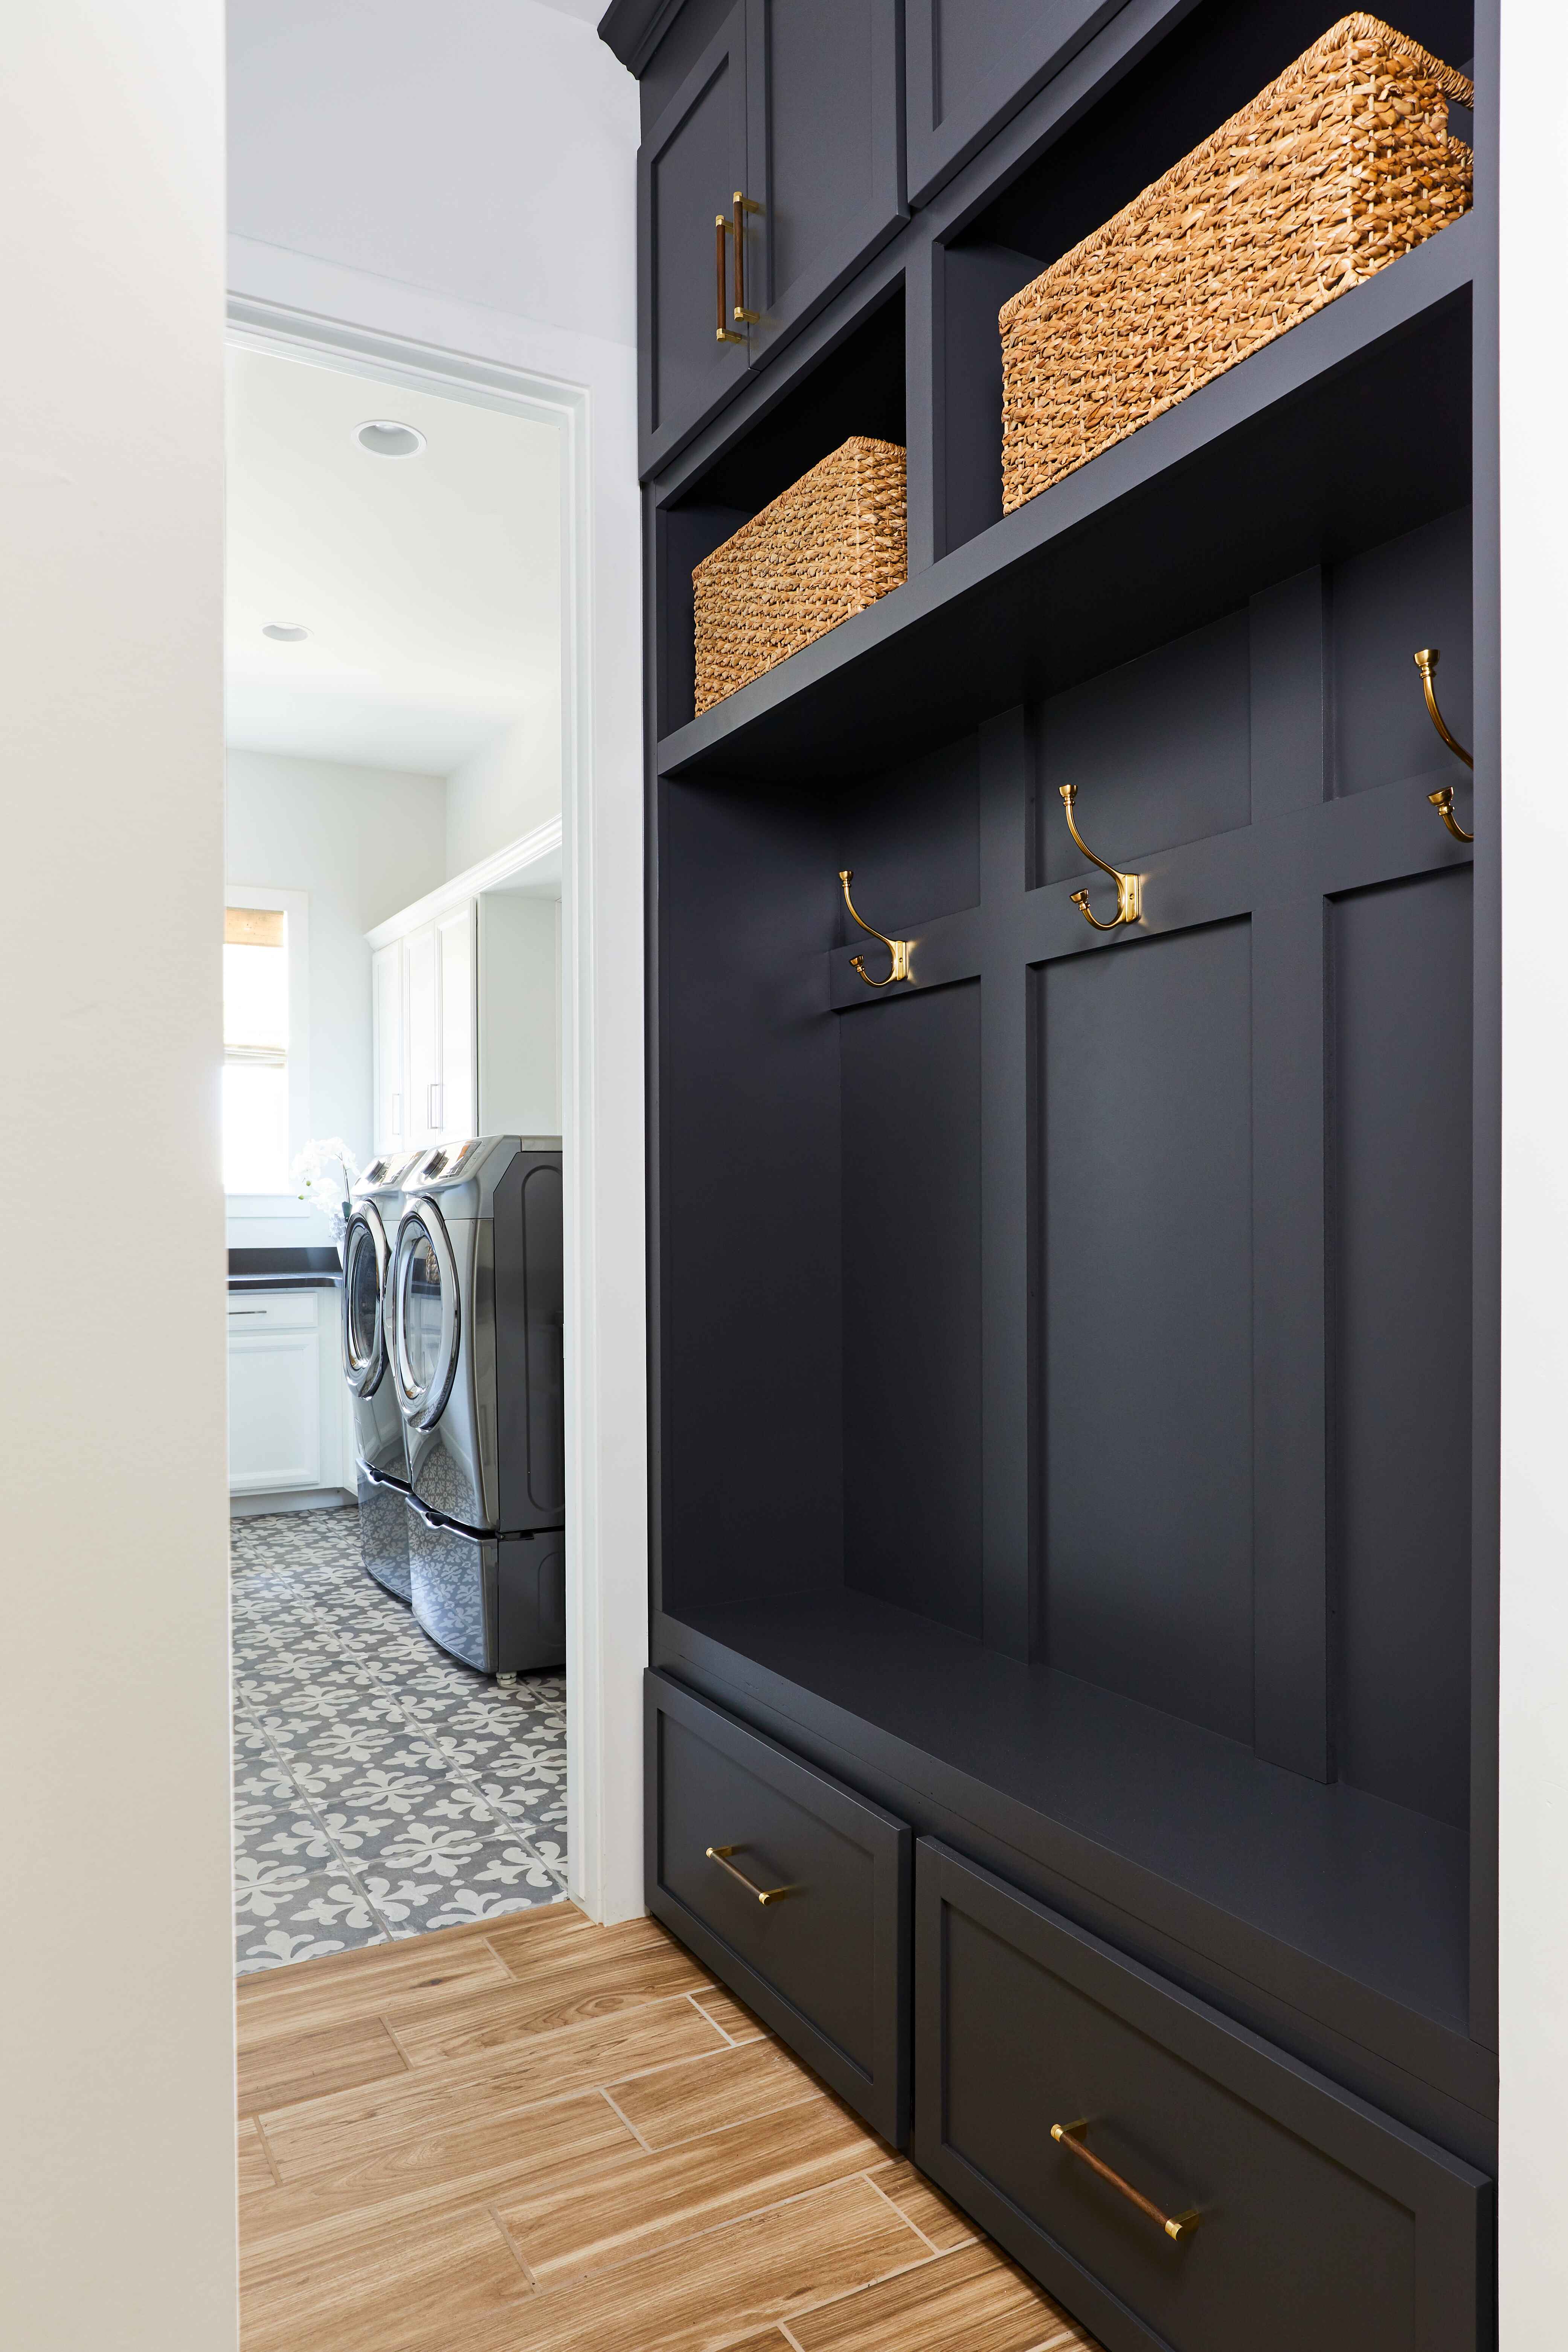 a black shelf with hooks and baskets in a laundry room